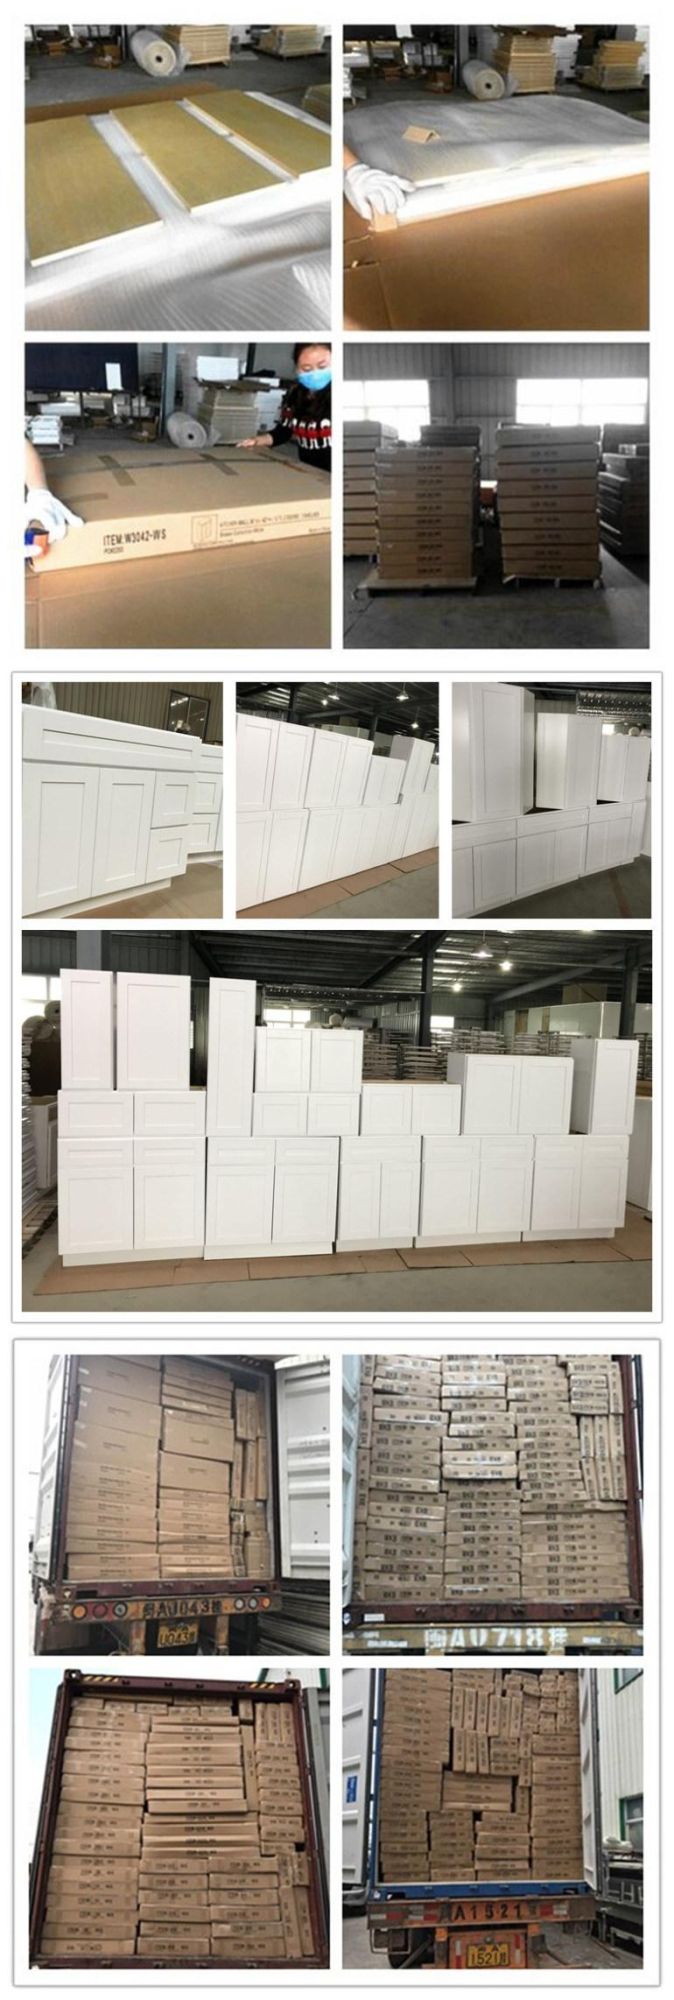 Modern Kitchen Cabinets with Plywood Carcase and Soft Close Doors